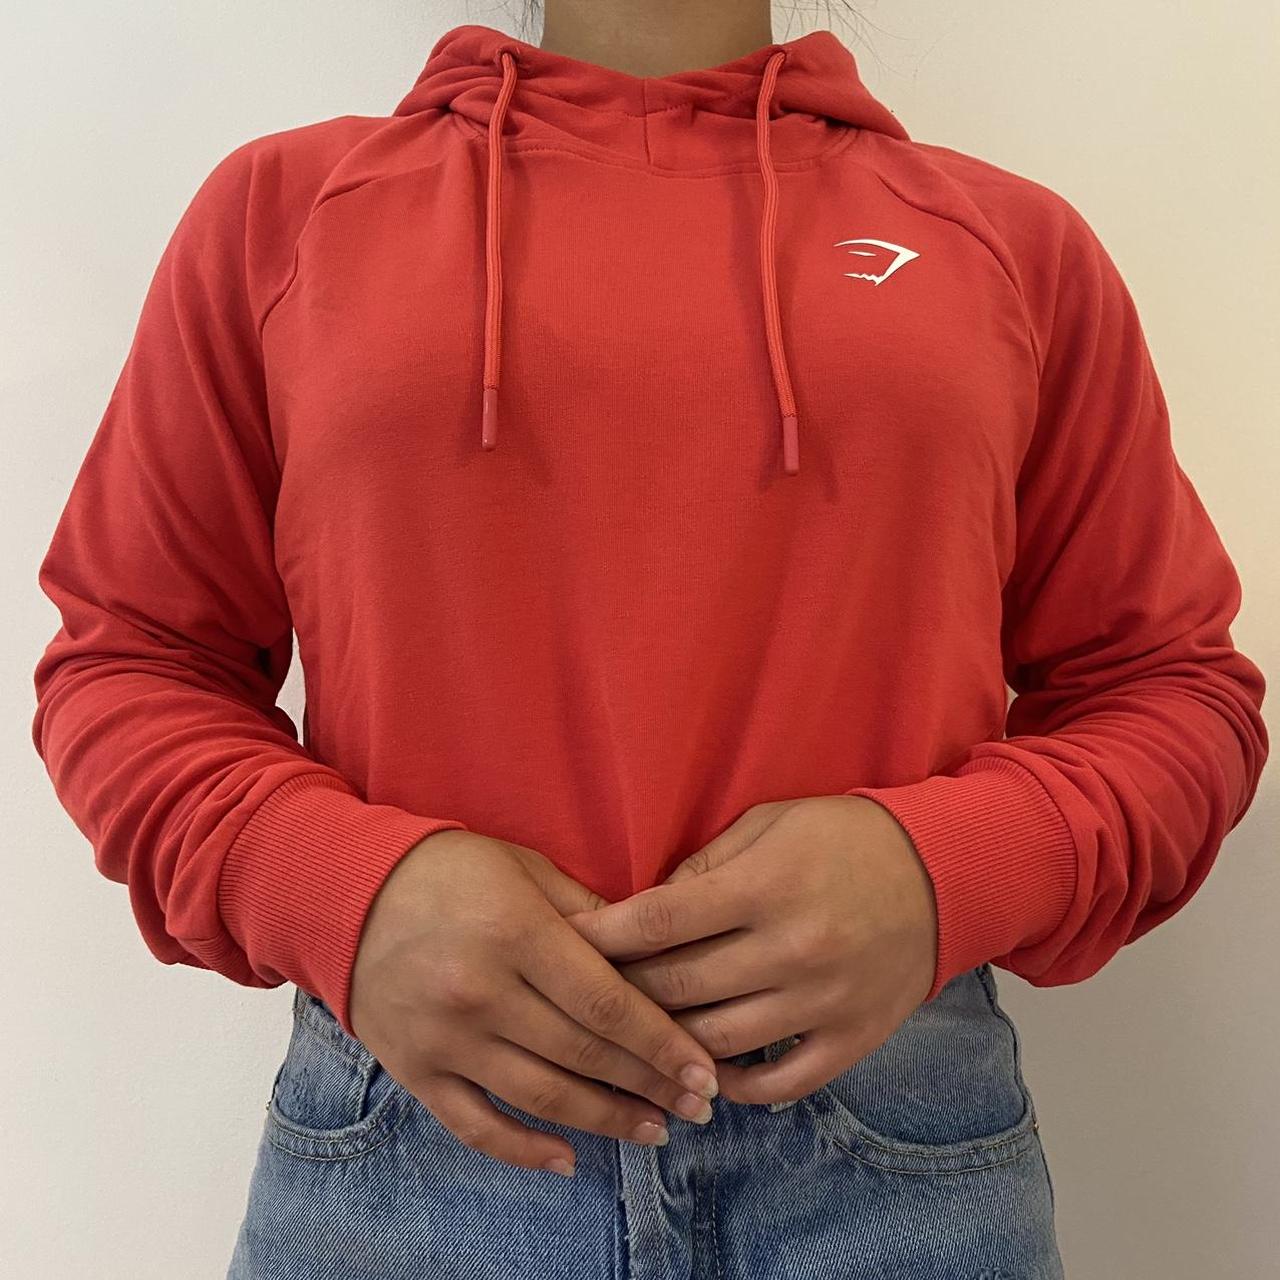 GYMSHARK CROPPED RED HOODIE, Size: S, Free